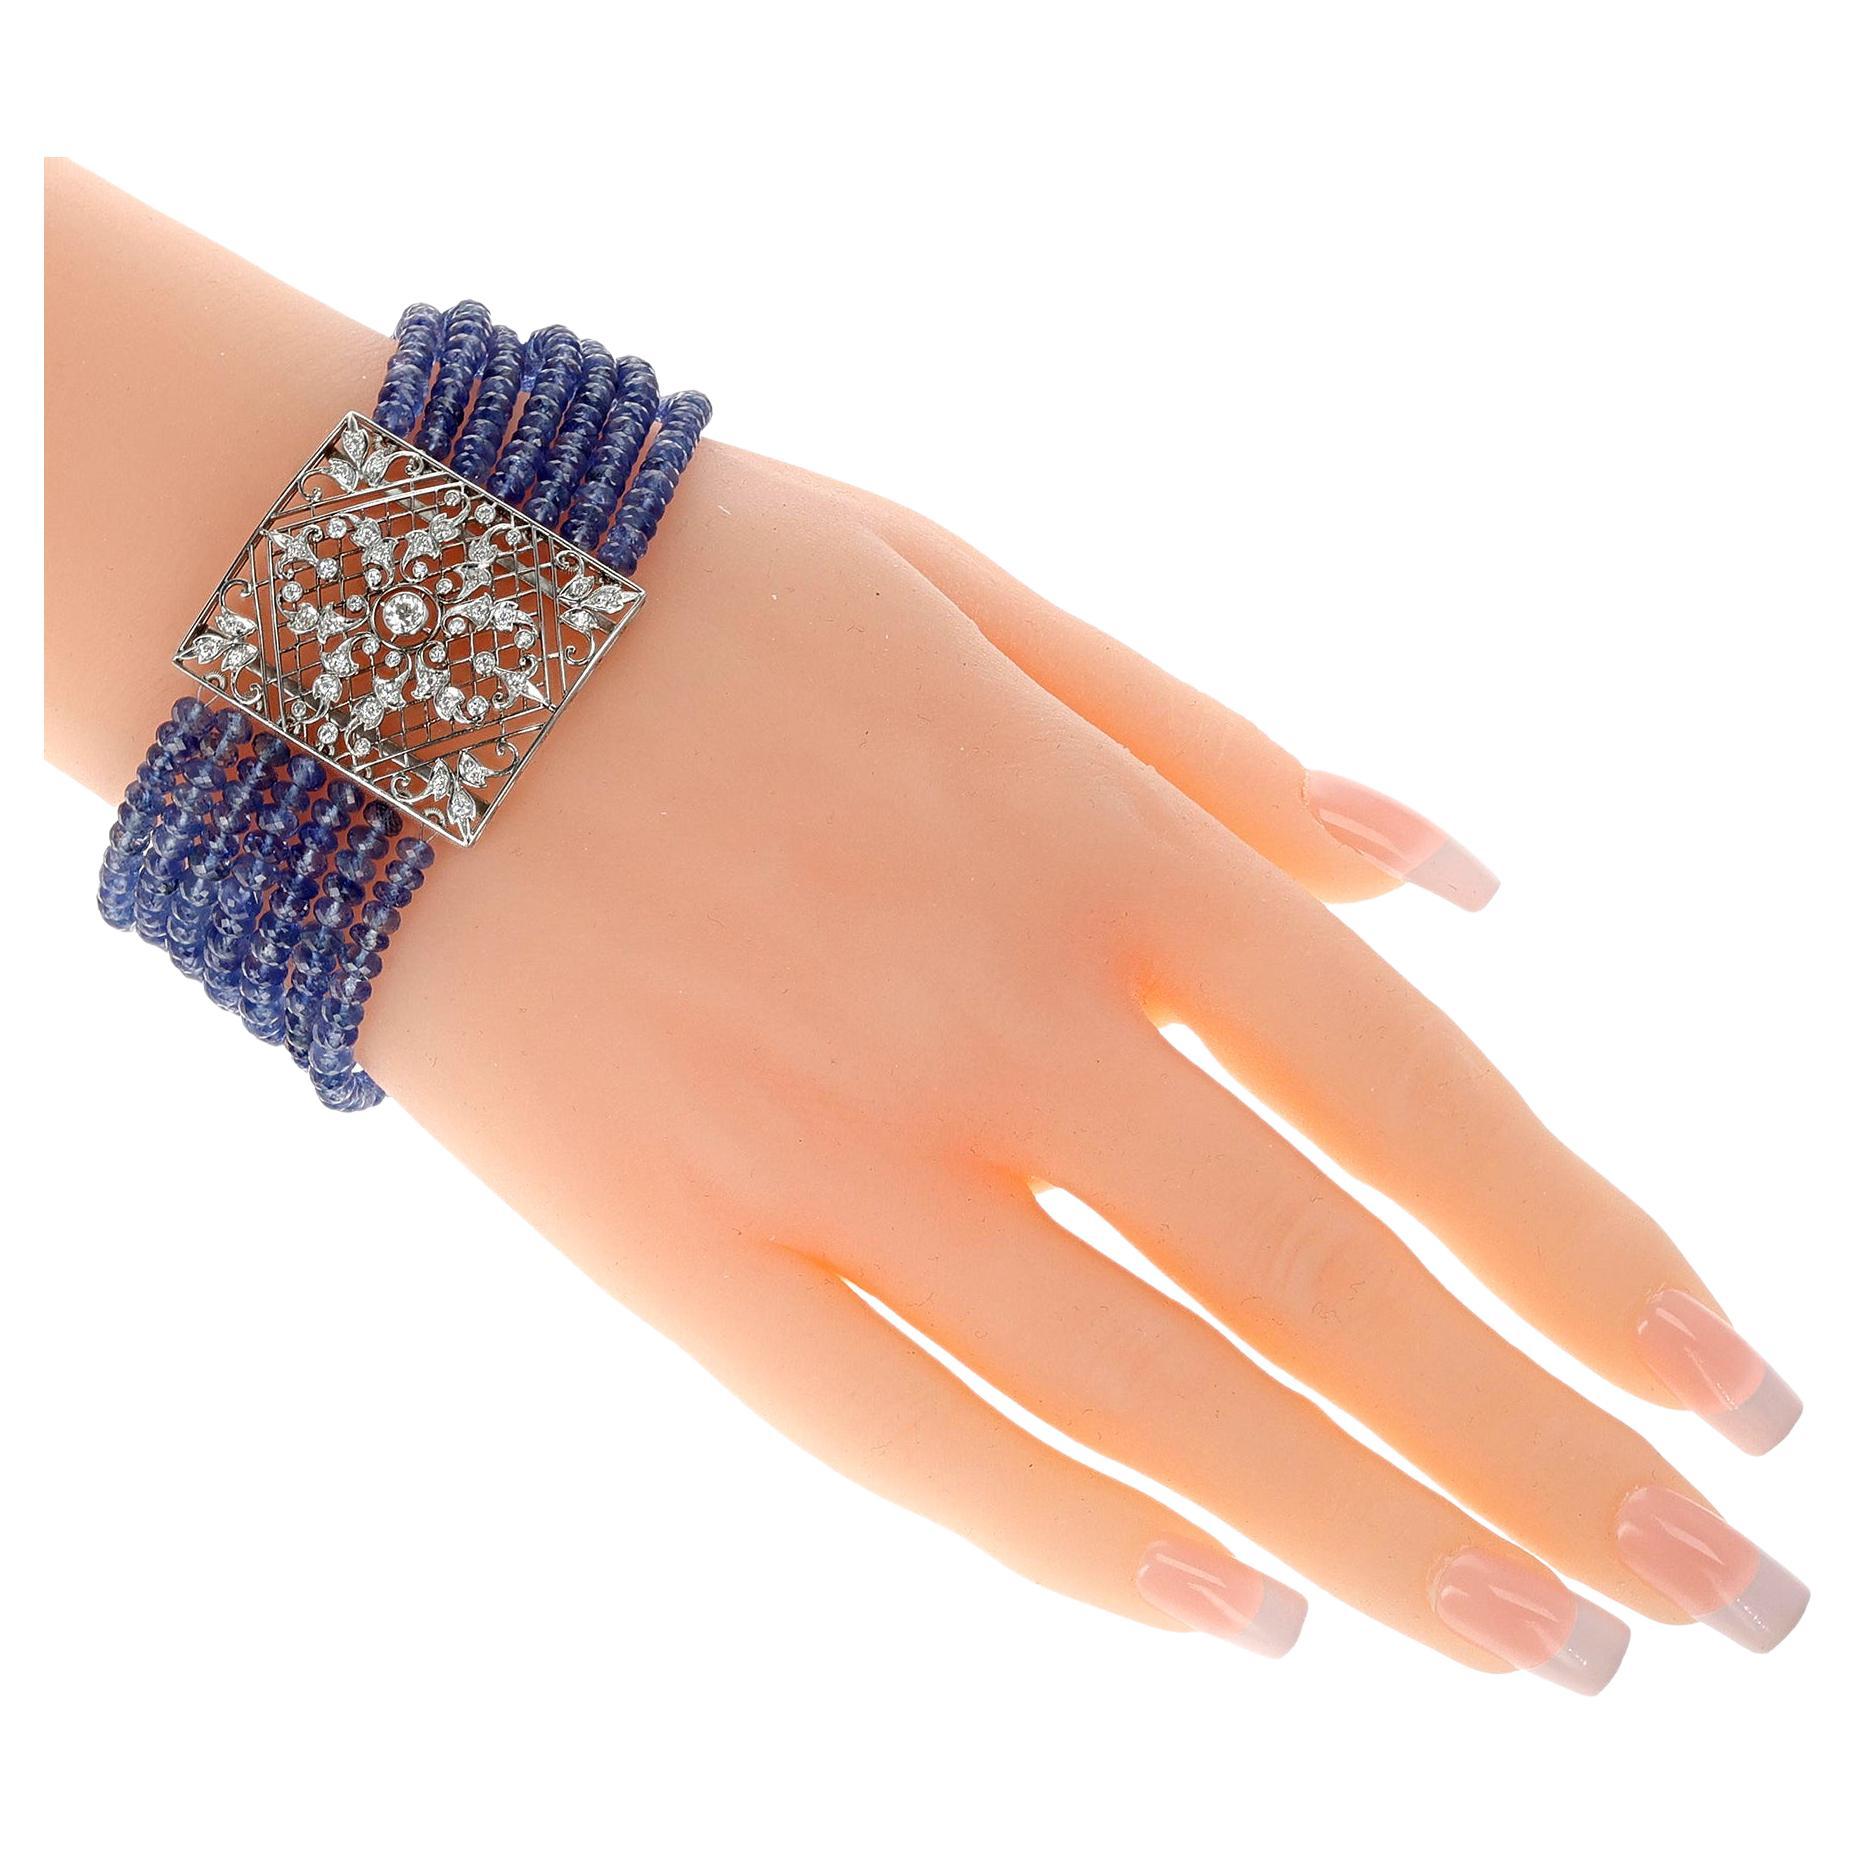 A 7 Line Sapphire Beads Bracelet with Diamond Clasp and Spacer. The total weight of the bracelet is 52.40 grams. The length is 7 inches.